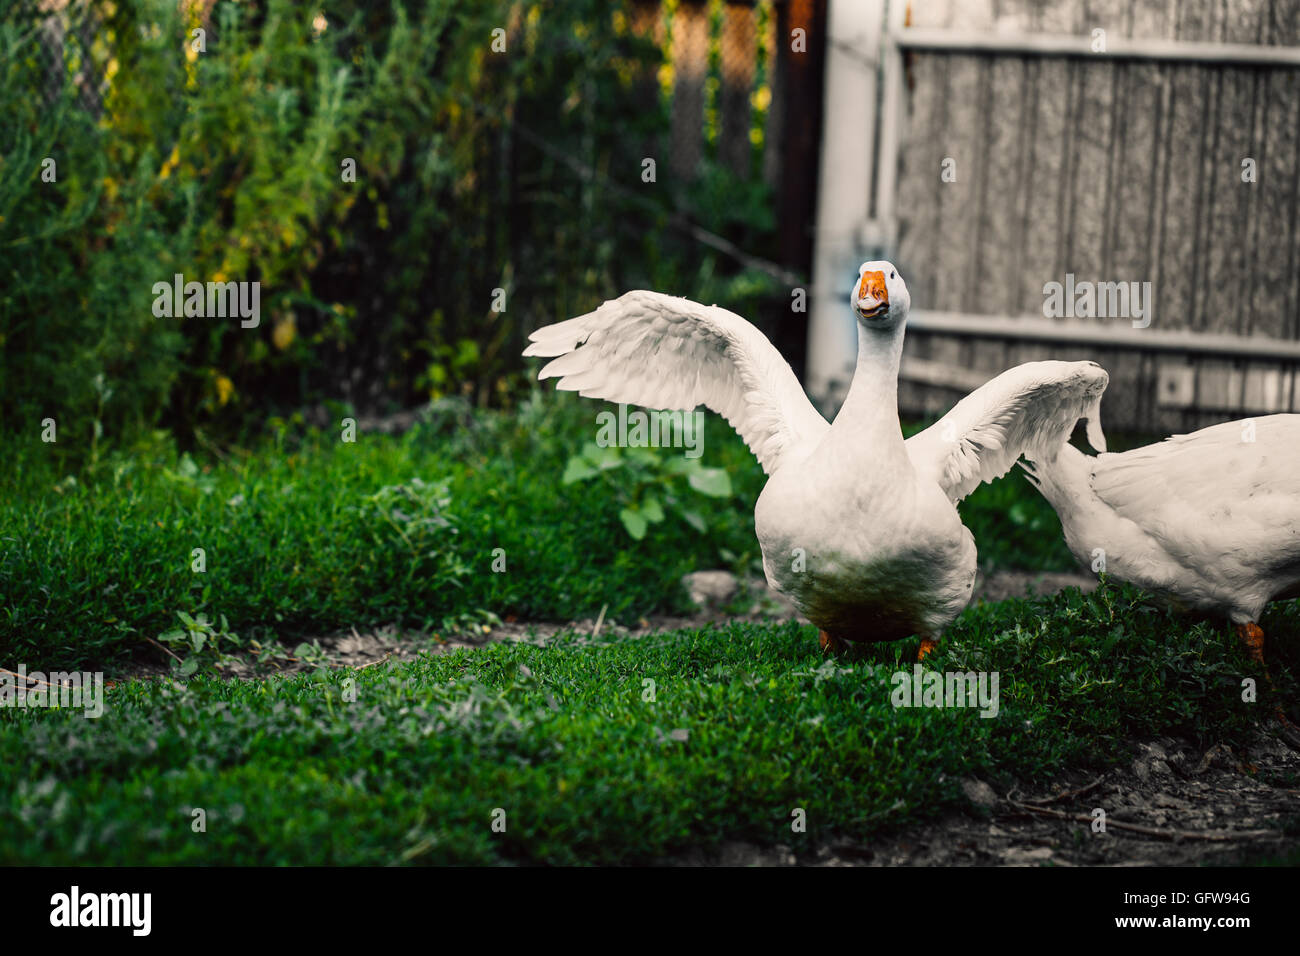 angry goose walking in the village on the lawn. Stock Photo